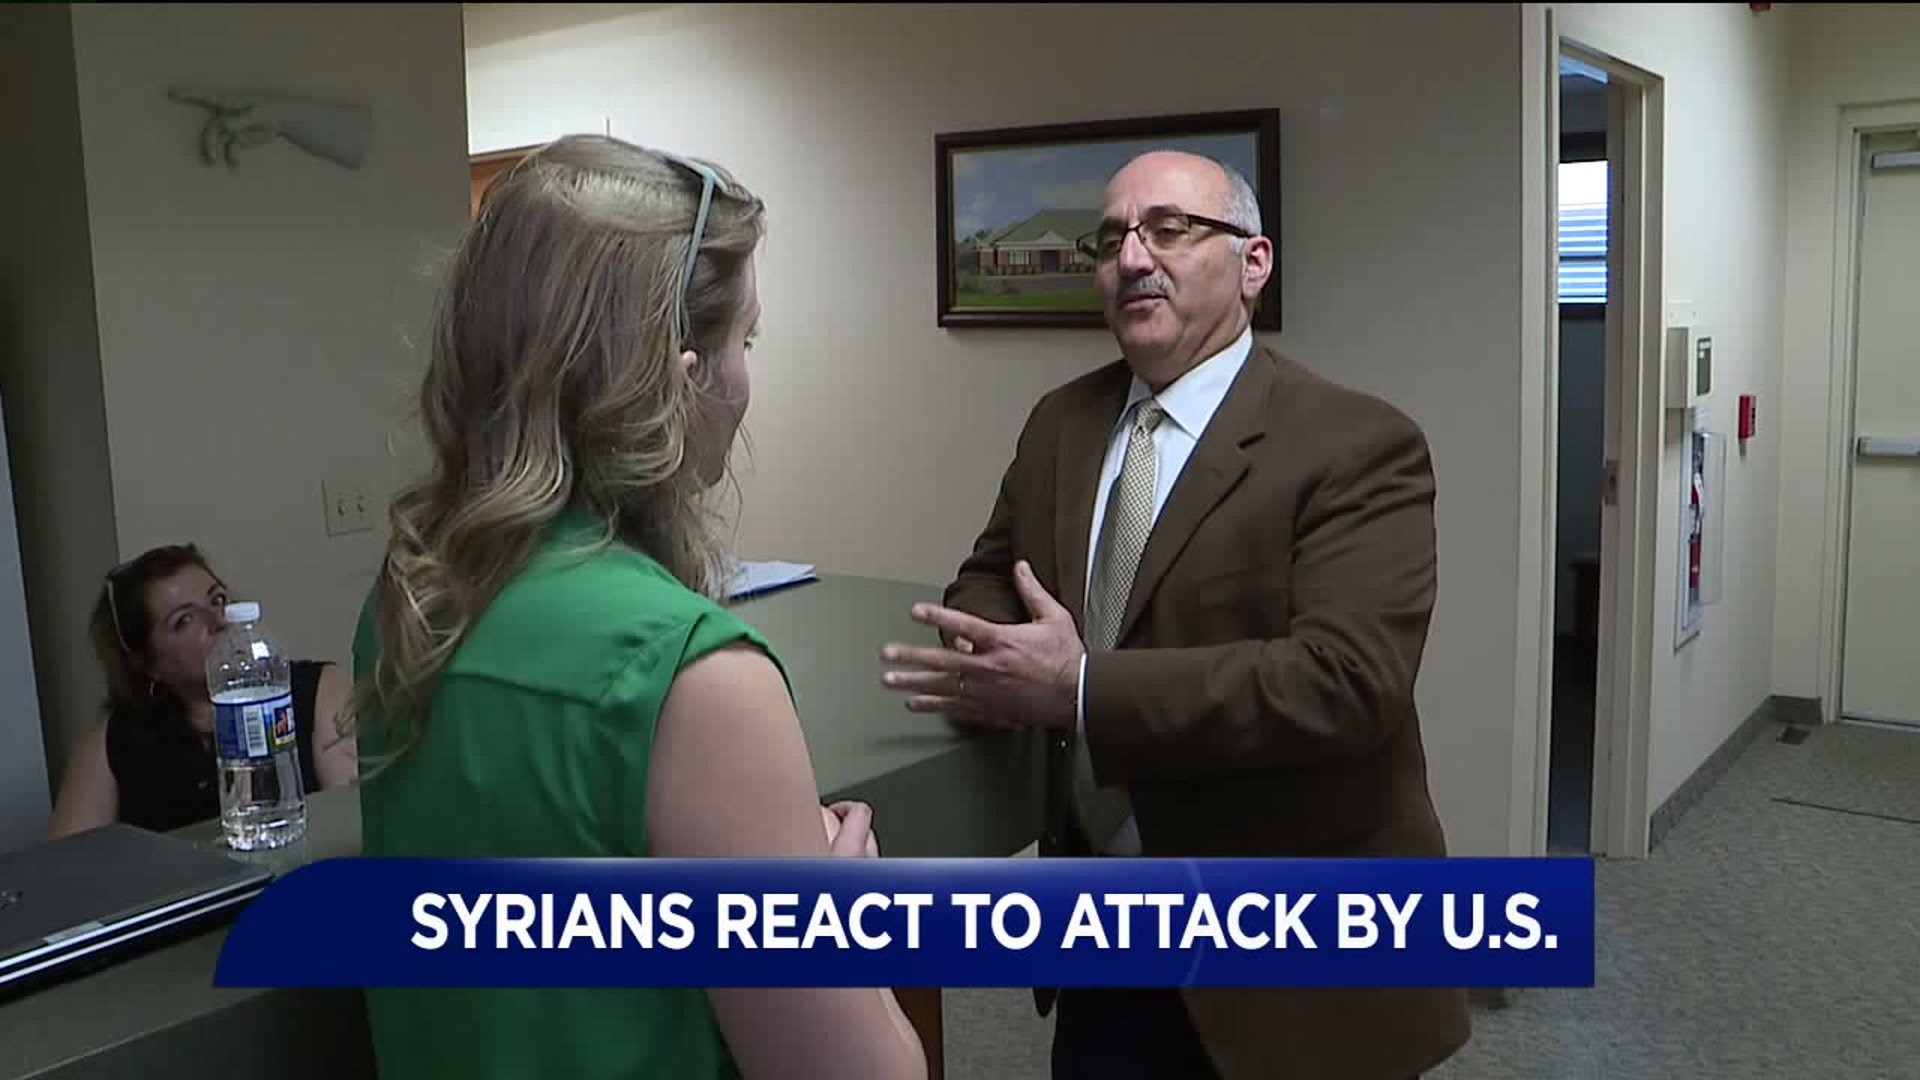 Local Syrians React to Attack by U.S.